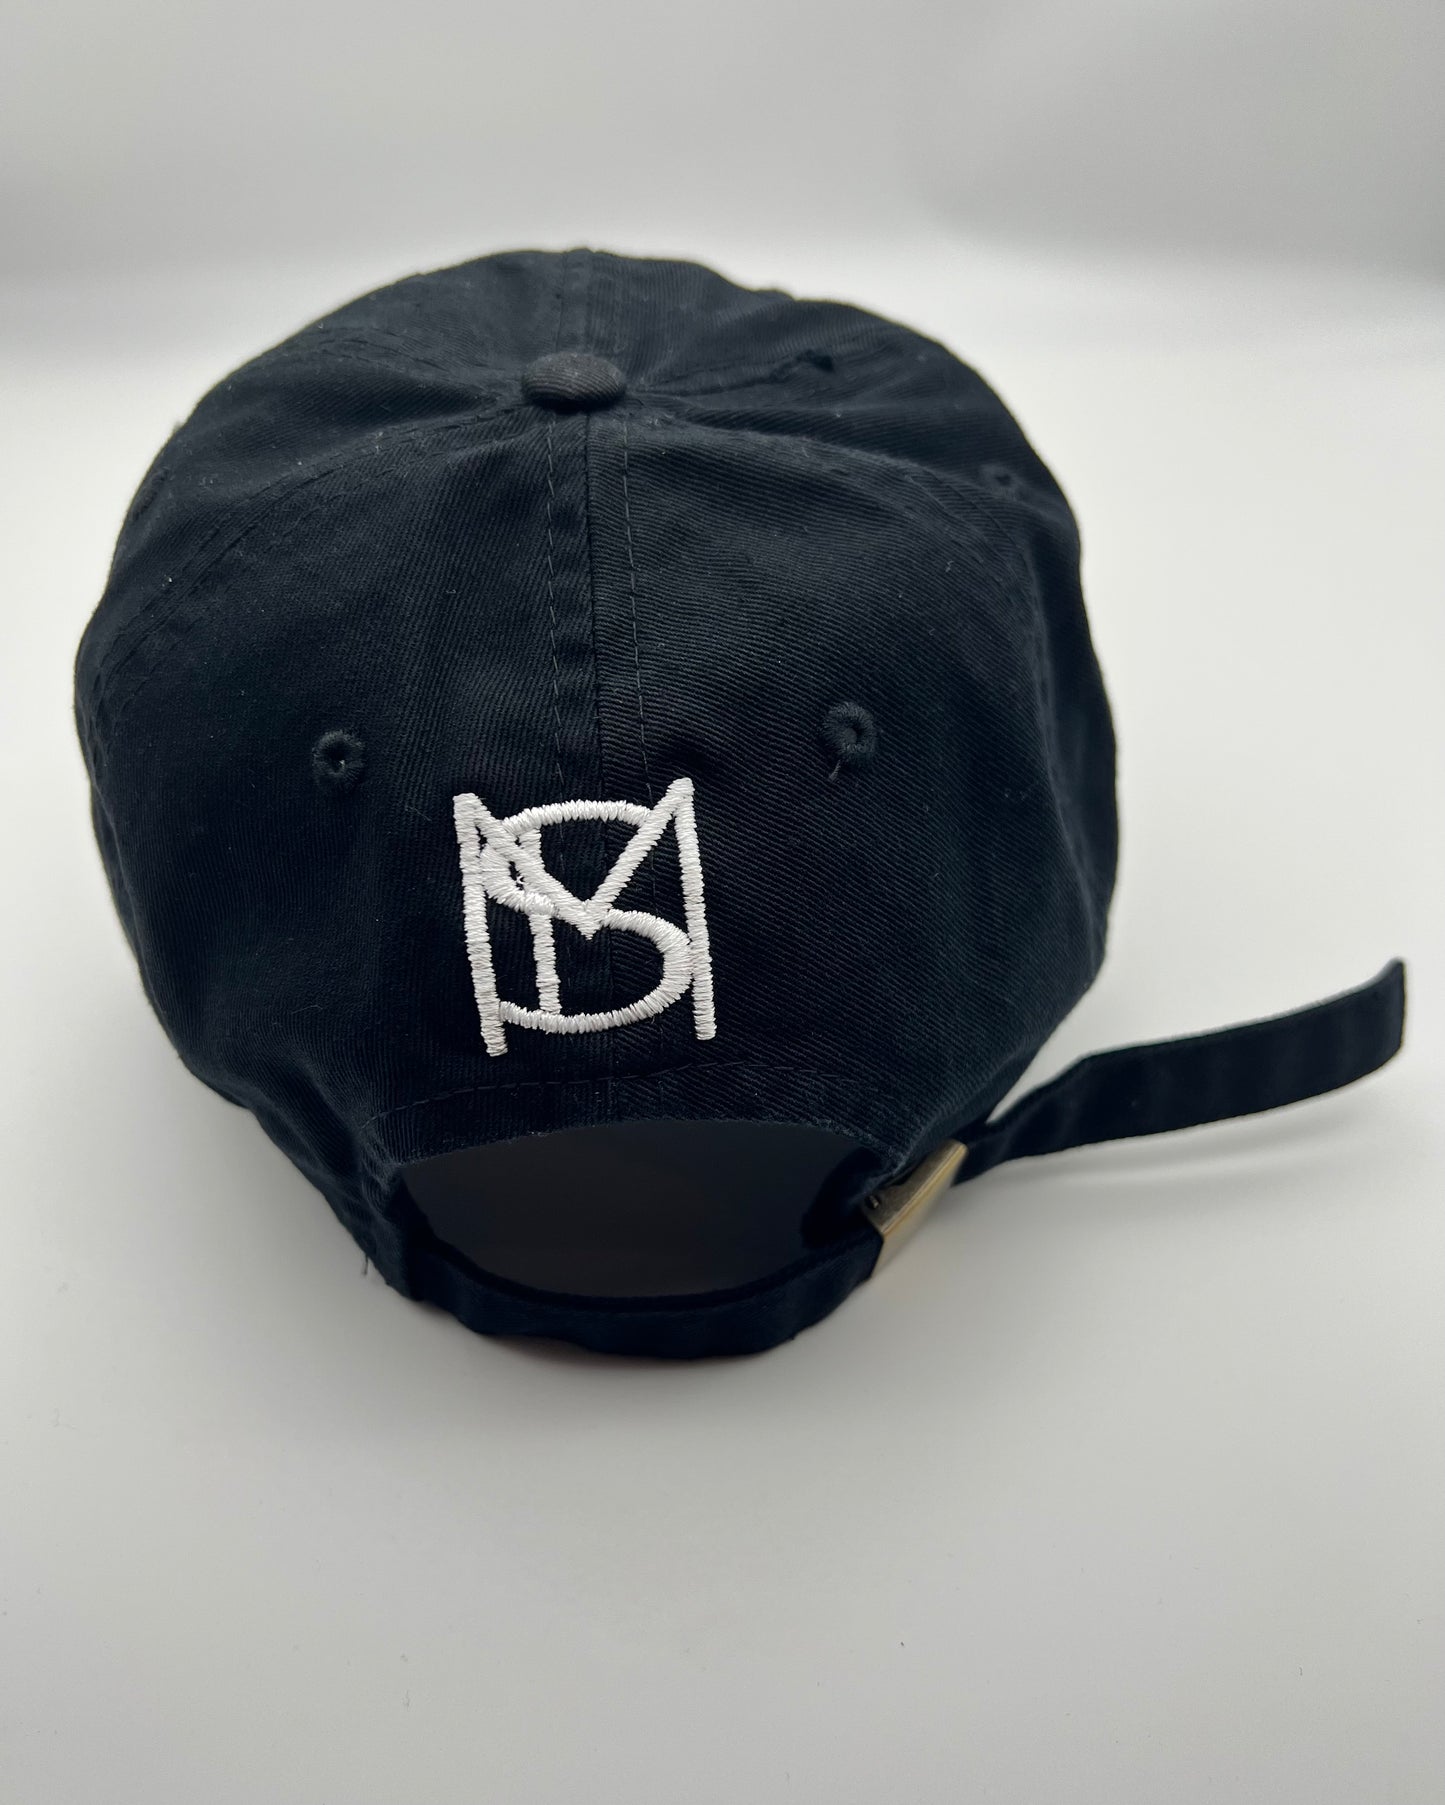 Vintage Dad Hats (FREE SHIPPING)